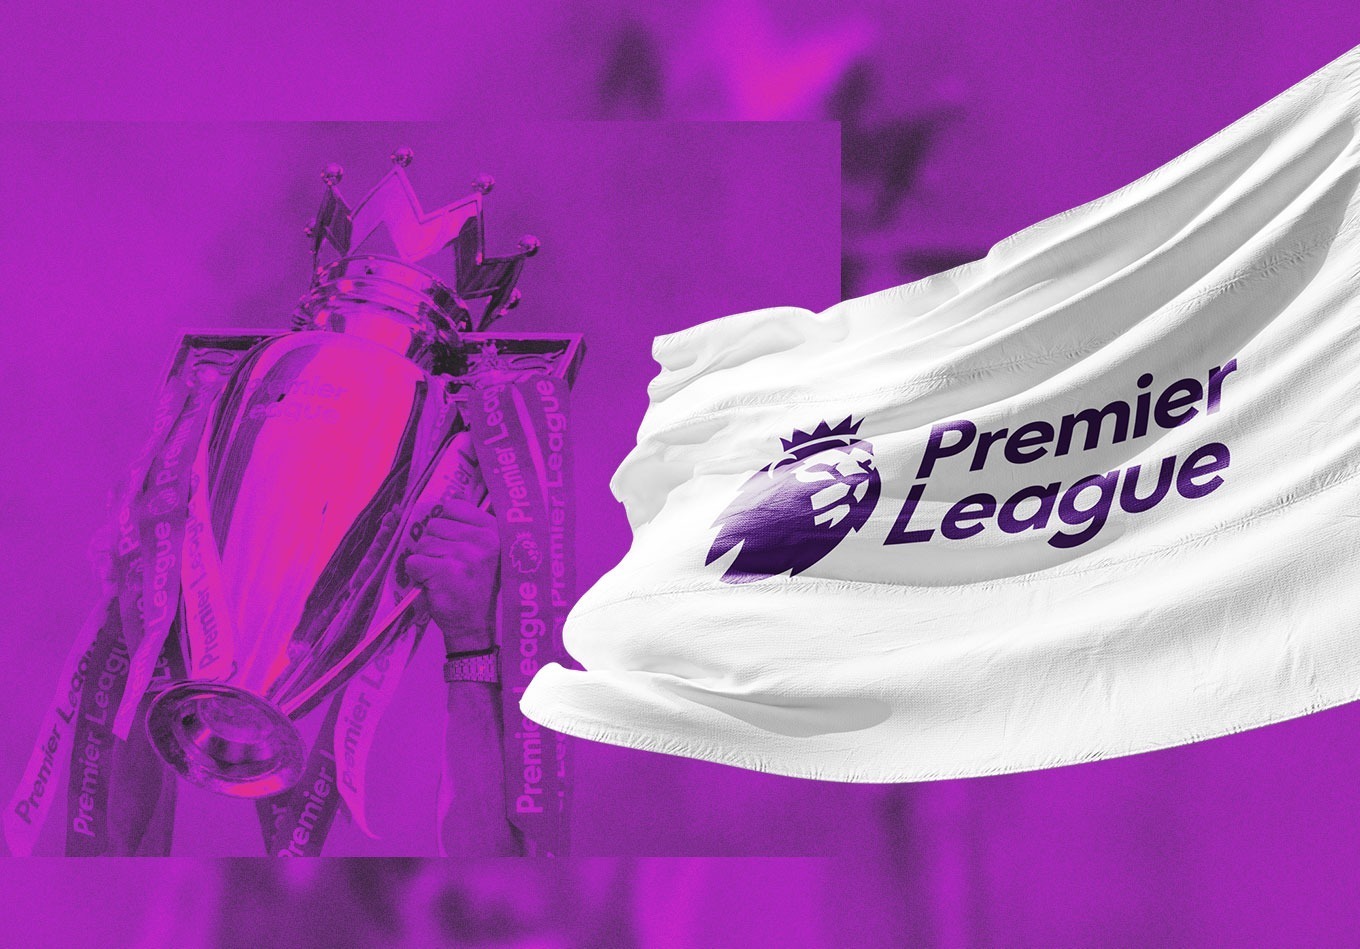 Football Manager Secures Multi-Year Premier League Licensing Deal